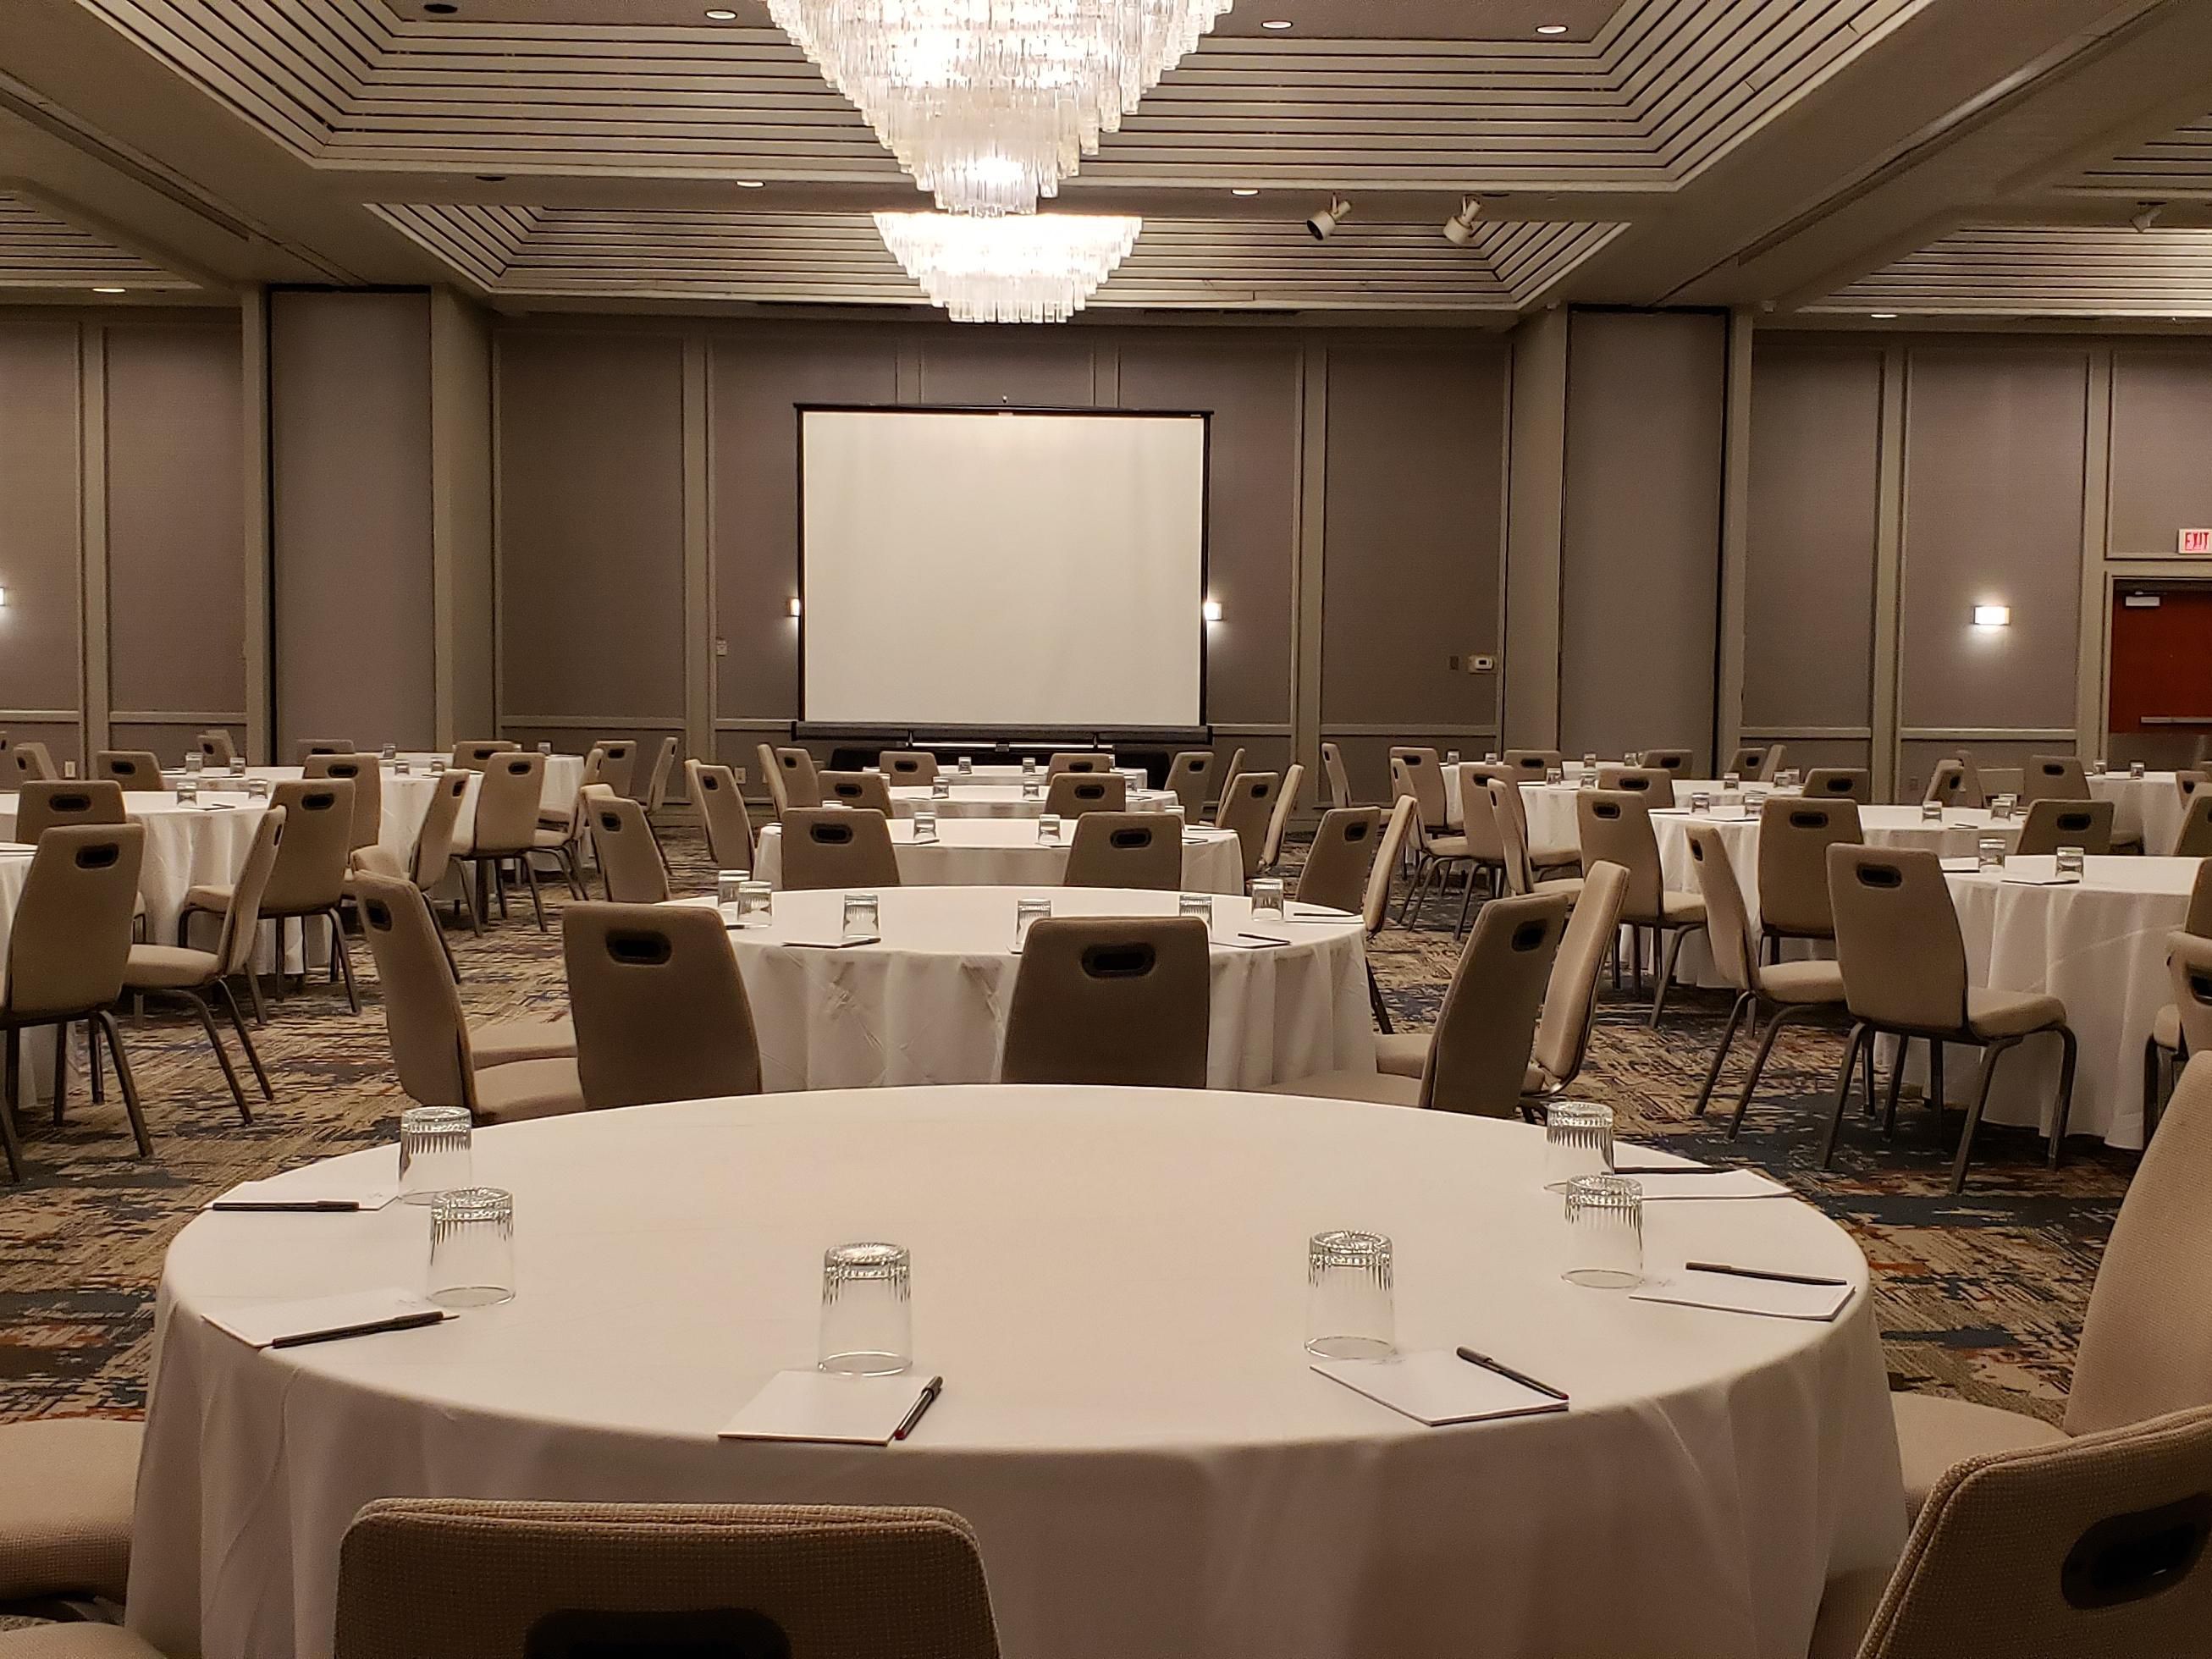 From a conference to a business seminar to a gala, host your next event in our hotel's fantastic meeting space. With 20,000 square feet, our space is fully customizable and outfitted with lighting, audio, and video systems to ensure successful meetings. Our hotel's Meetings Director will assist you in planning the perfect event for your guests.
